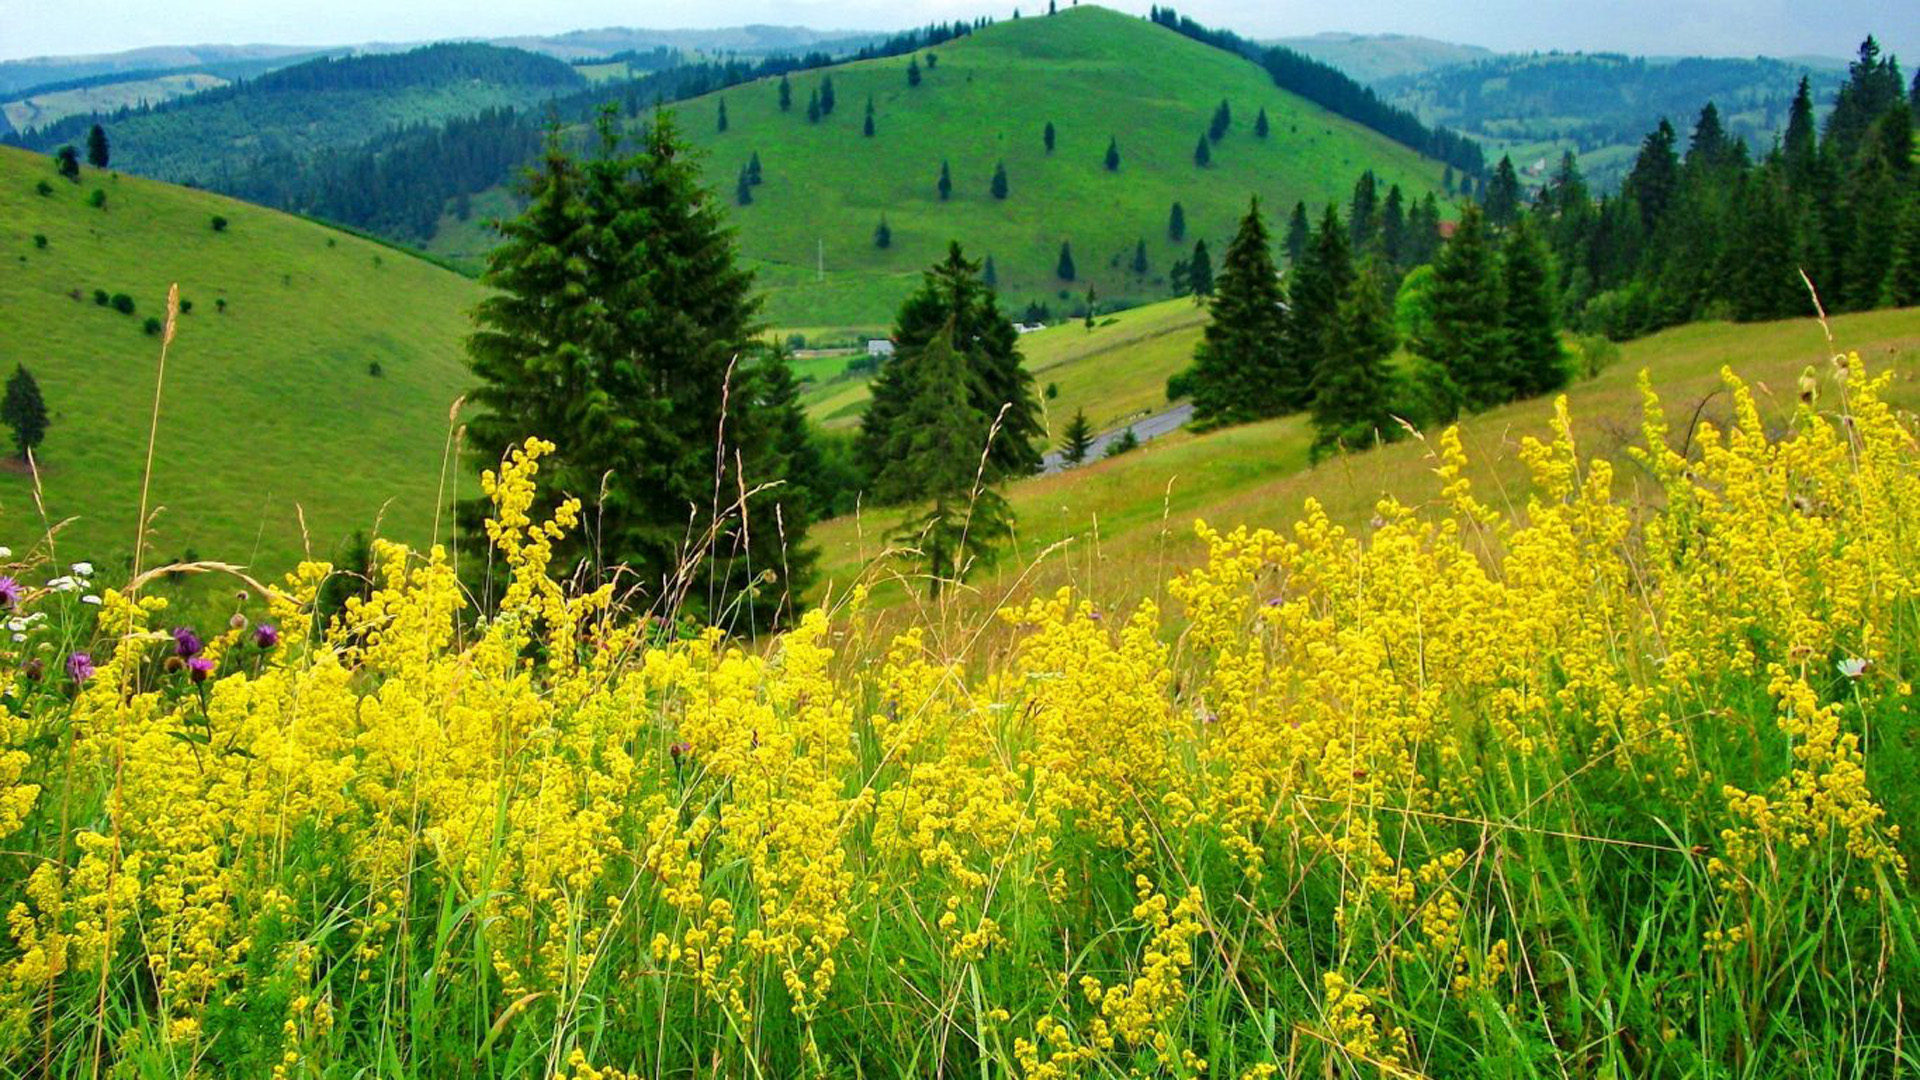 Yellow Mountain Flowers Hills Green Grass Forest With Christmas Trees